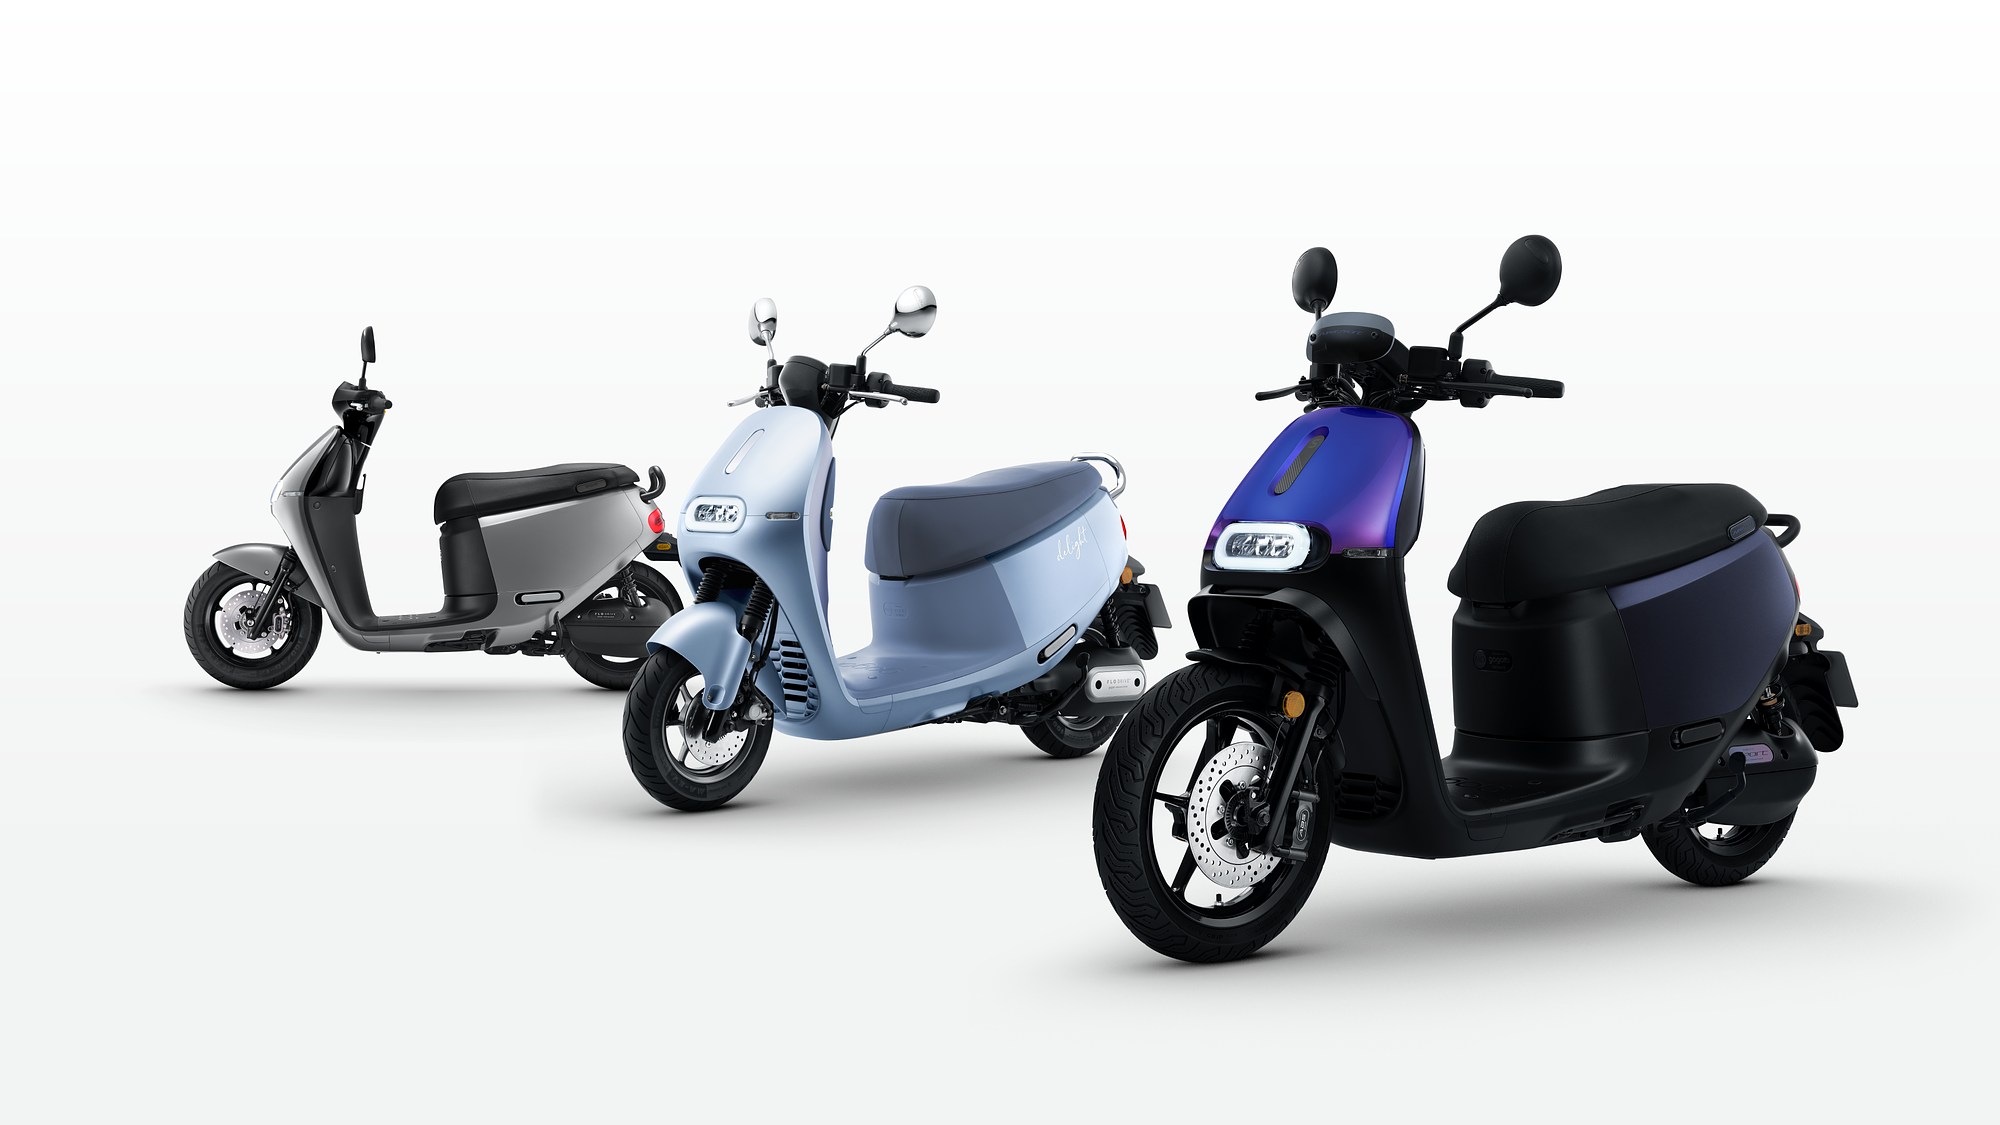 the mmda just banned e-bikes on national roads. but these bad boys are different